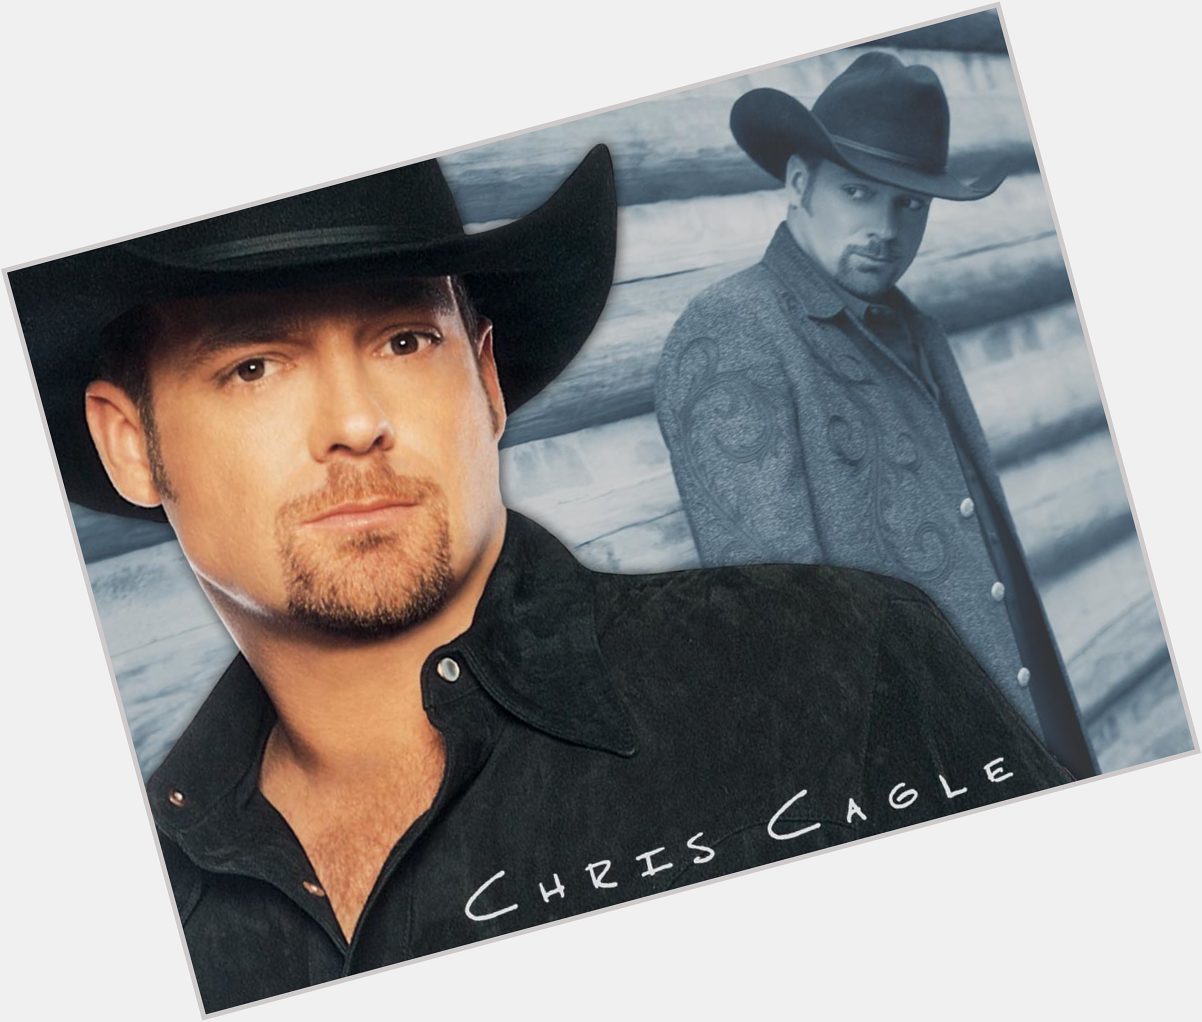 Happy Birthday Chris Cagle 2000s Top New Artist from the Academy of Country Music.  